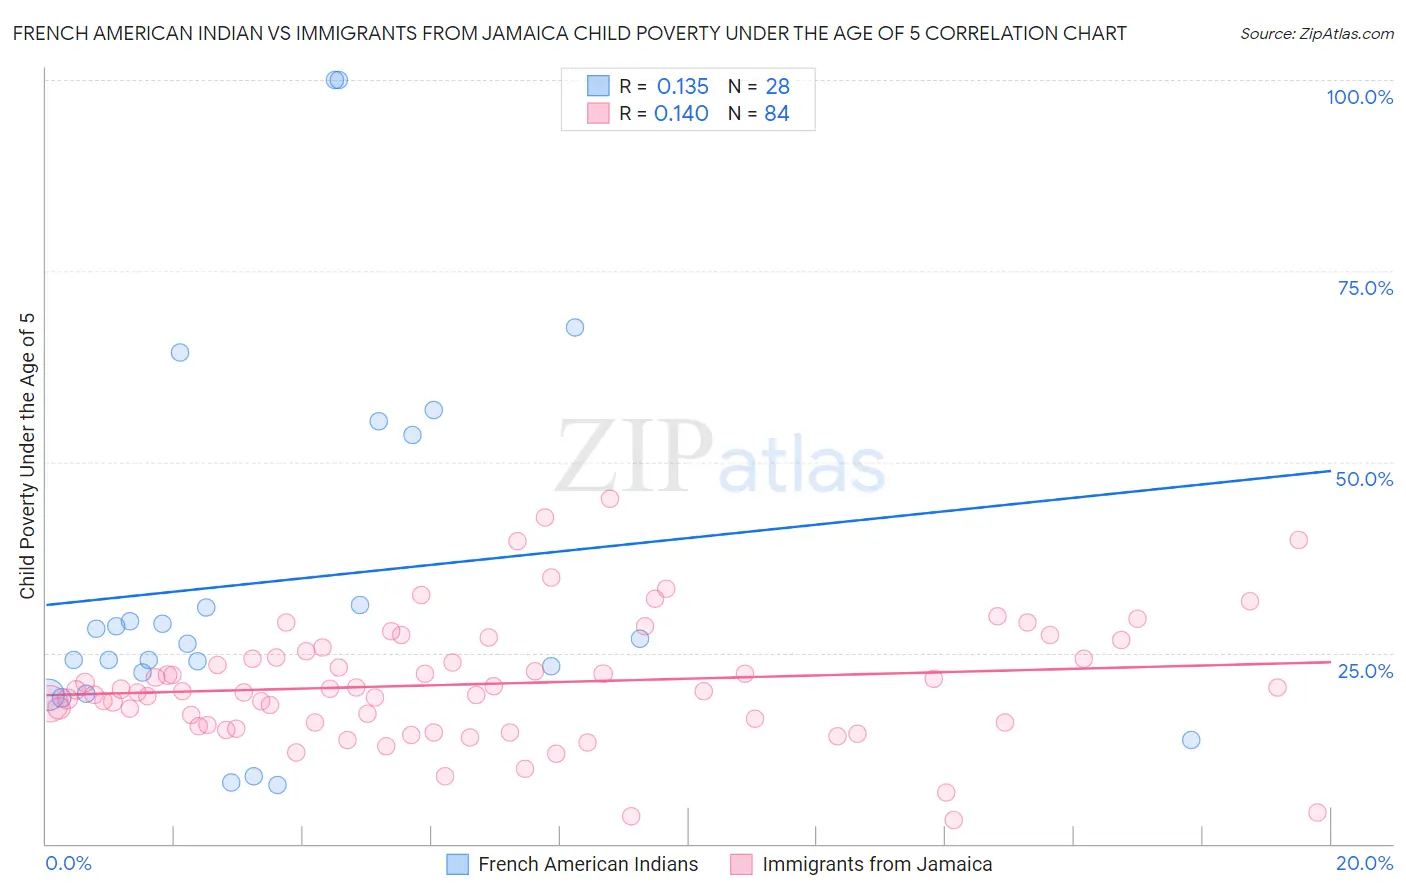 French American Indian vs Immigrants from Jamaica Child Poverty Under the Age of 5